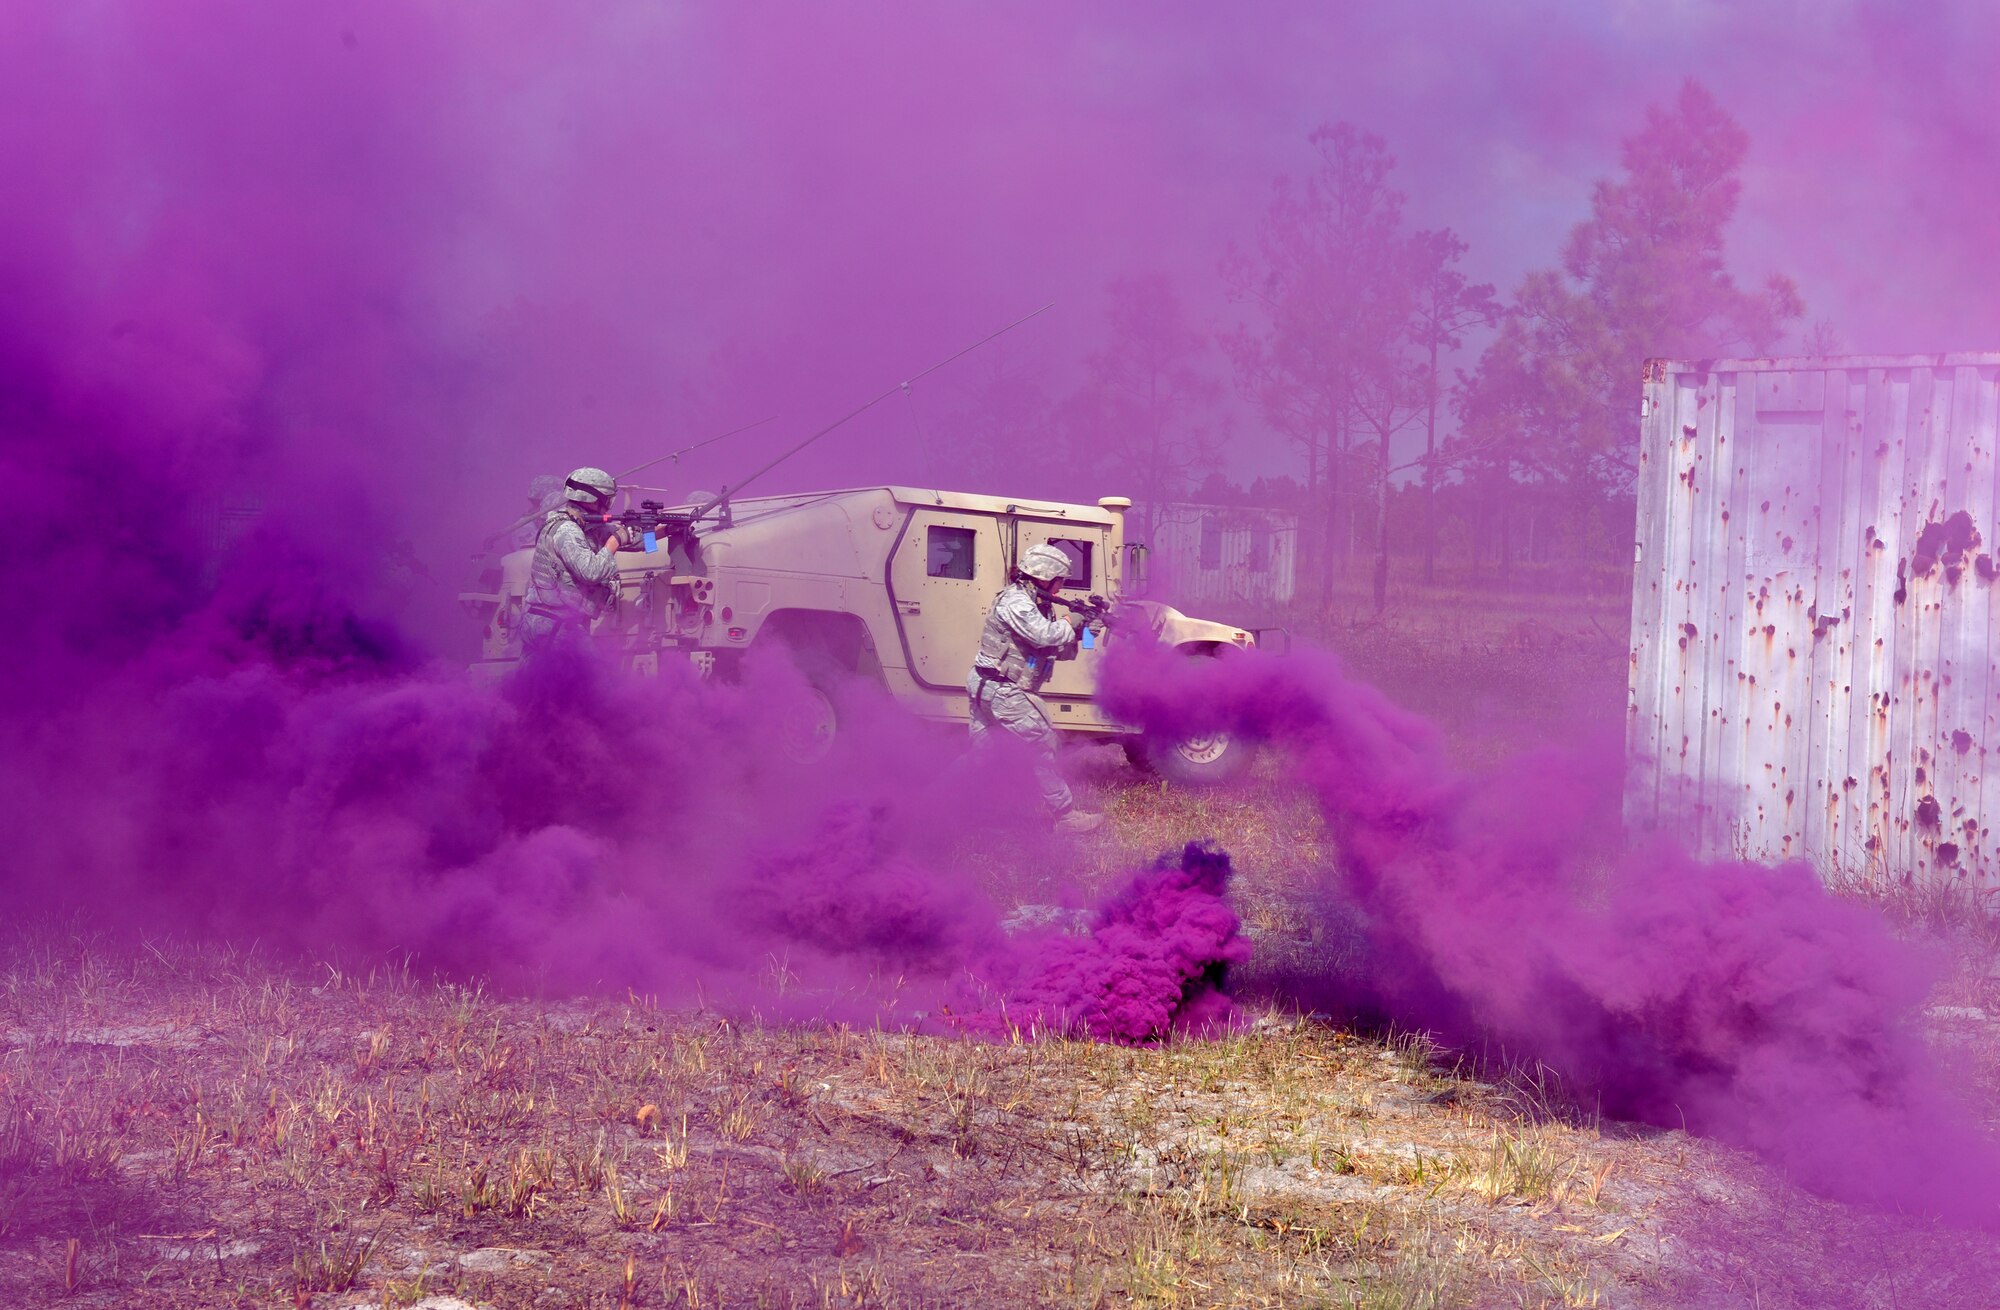 AVON PARK, Fla.-- Members of the 823rd Base Defense Squadron from Moody Air Force Base, Ga., travel behind a cloud of purple smoke during joint exercise ATLANTIC STRIKE 11-01 Feb. 16. The 823rd BDS invaded a mock village with support from a joint terminal attack controller calling in airstrikes during the exercise. (U.S. Air Force photo/Airman 1st Class Benjamin Wiseman)(RELEASED)